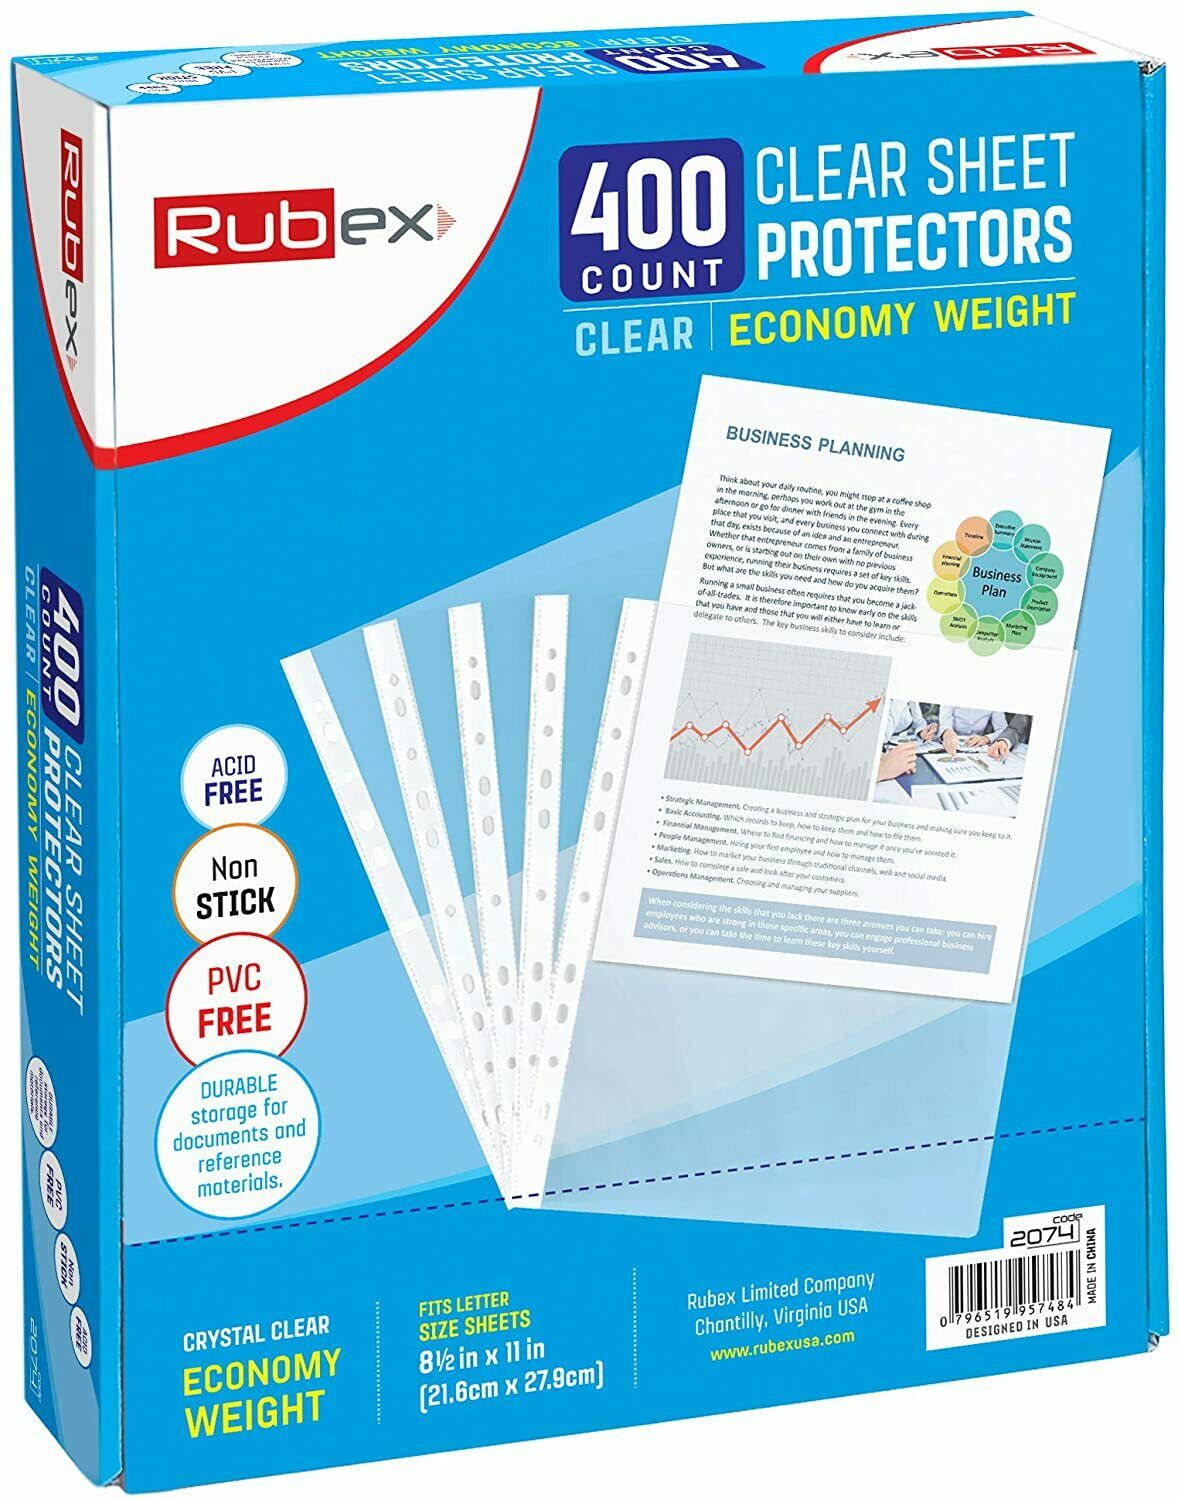 400 Sheet Protectors 8.5 x 11 Inches - Clear Plastic Sheet